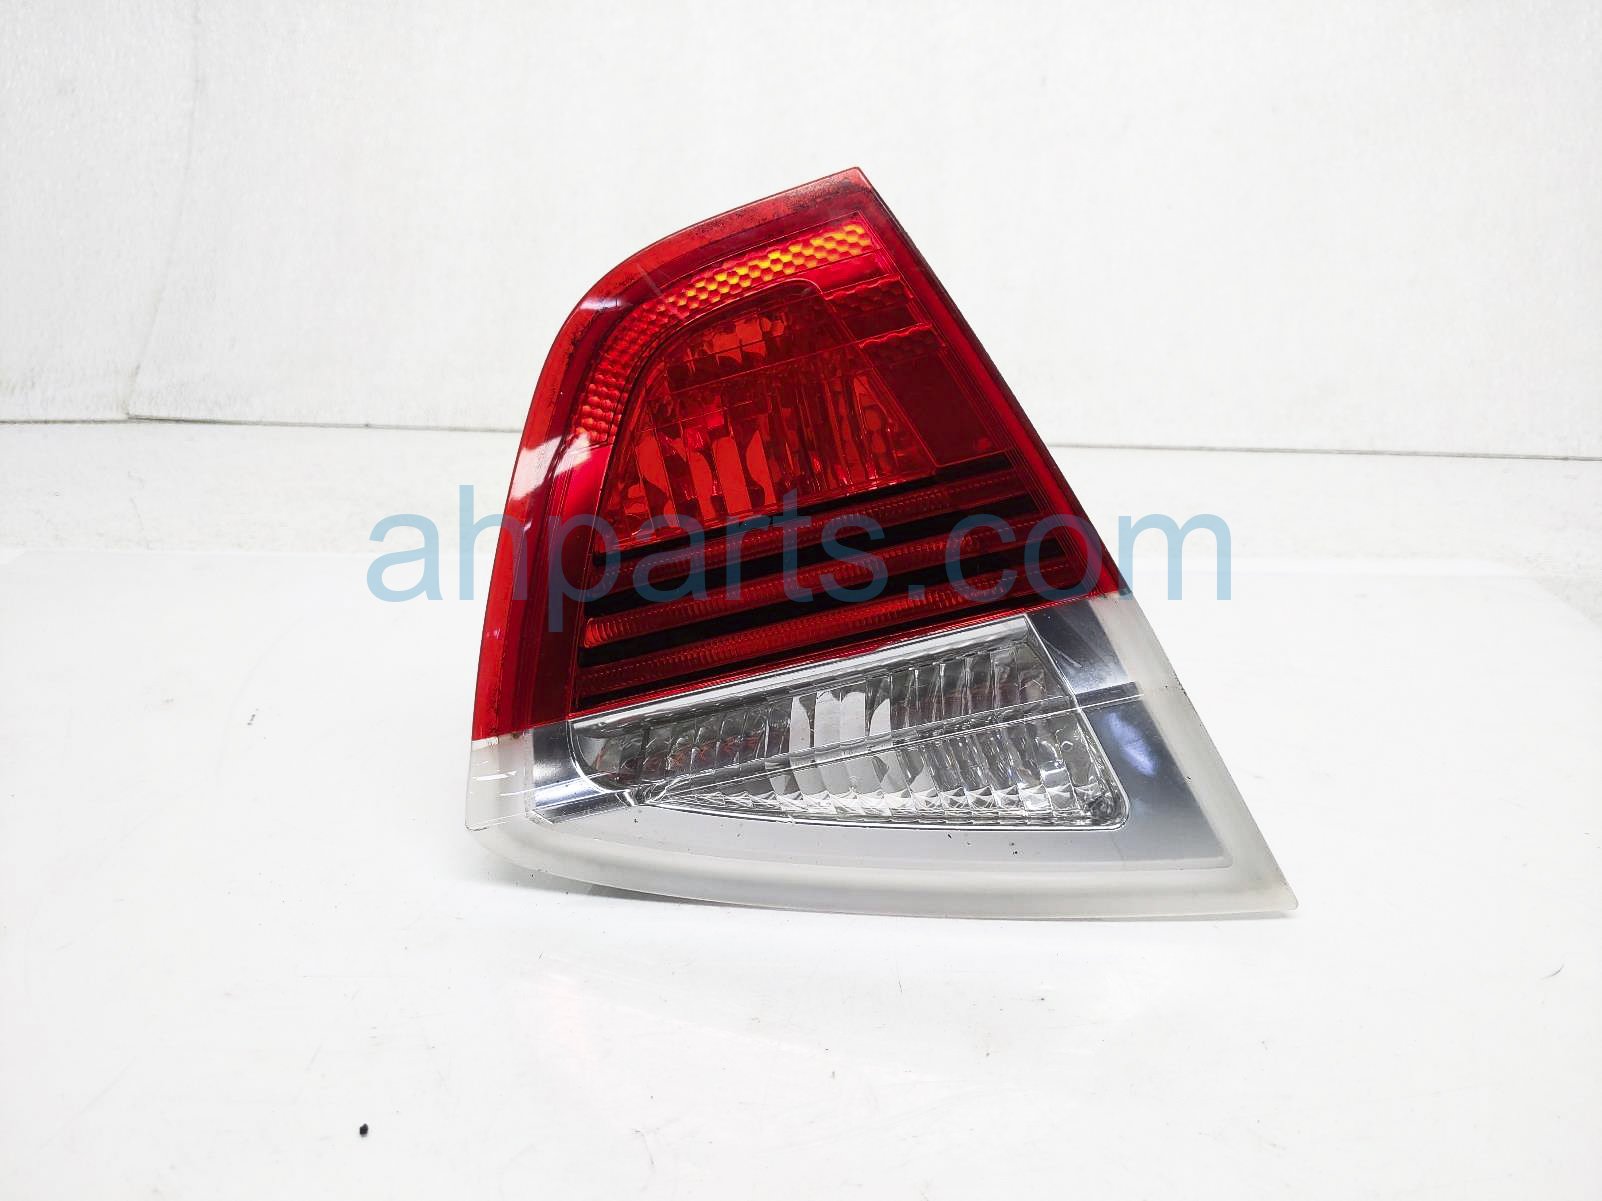 $35 BMW RR/LH BACK UP LAMP (ON TRUNK)